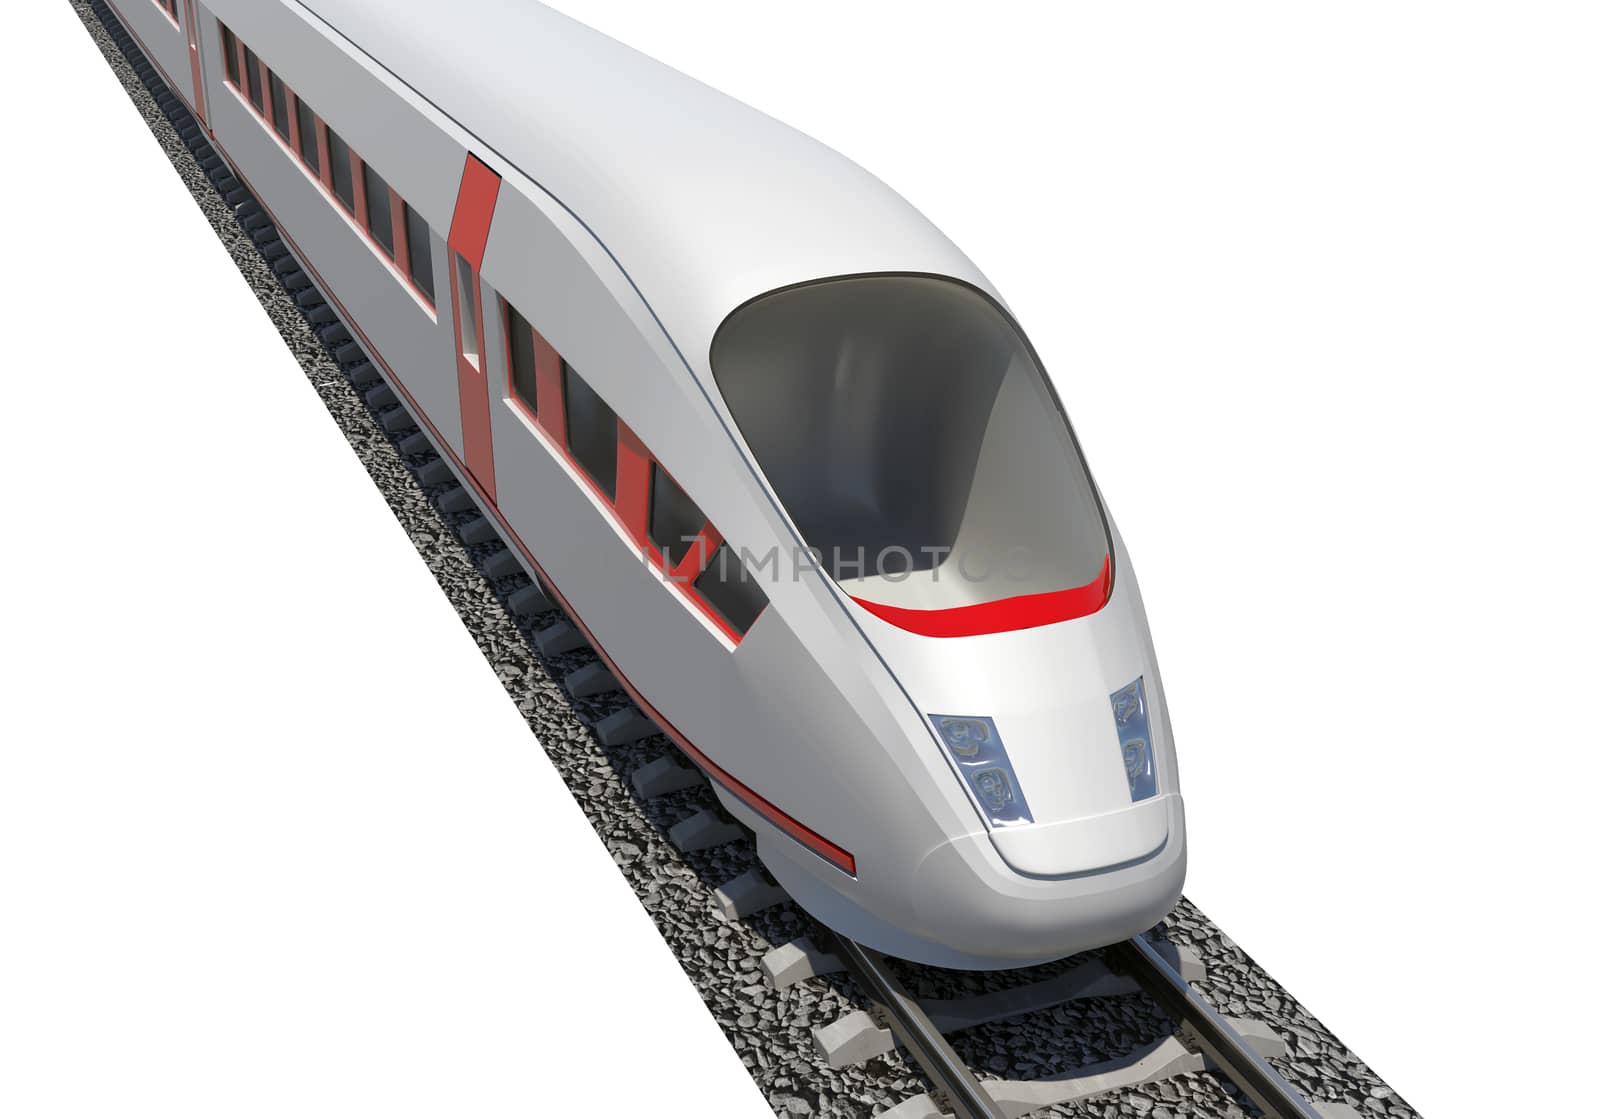 Train with red stripes on isolated white background